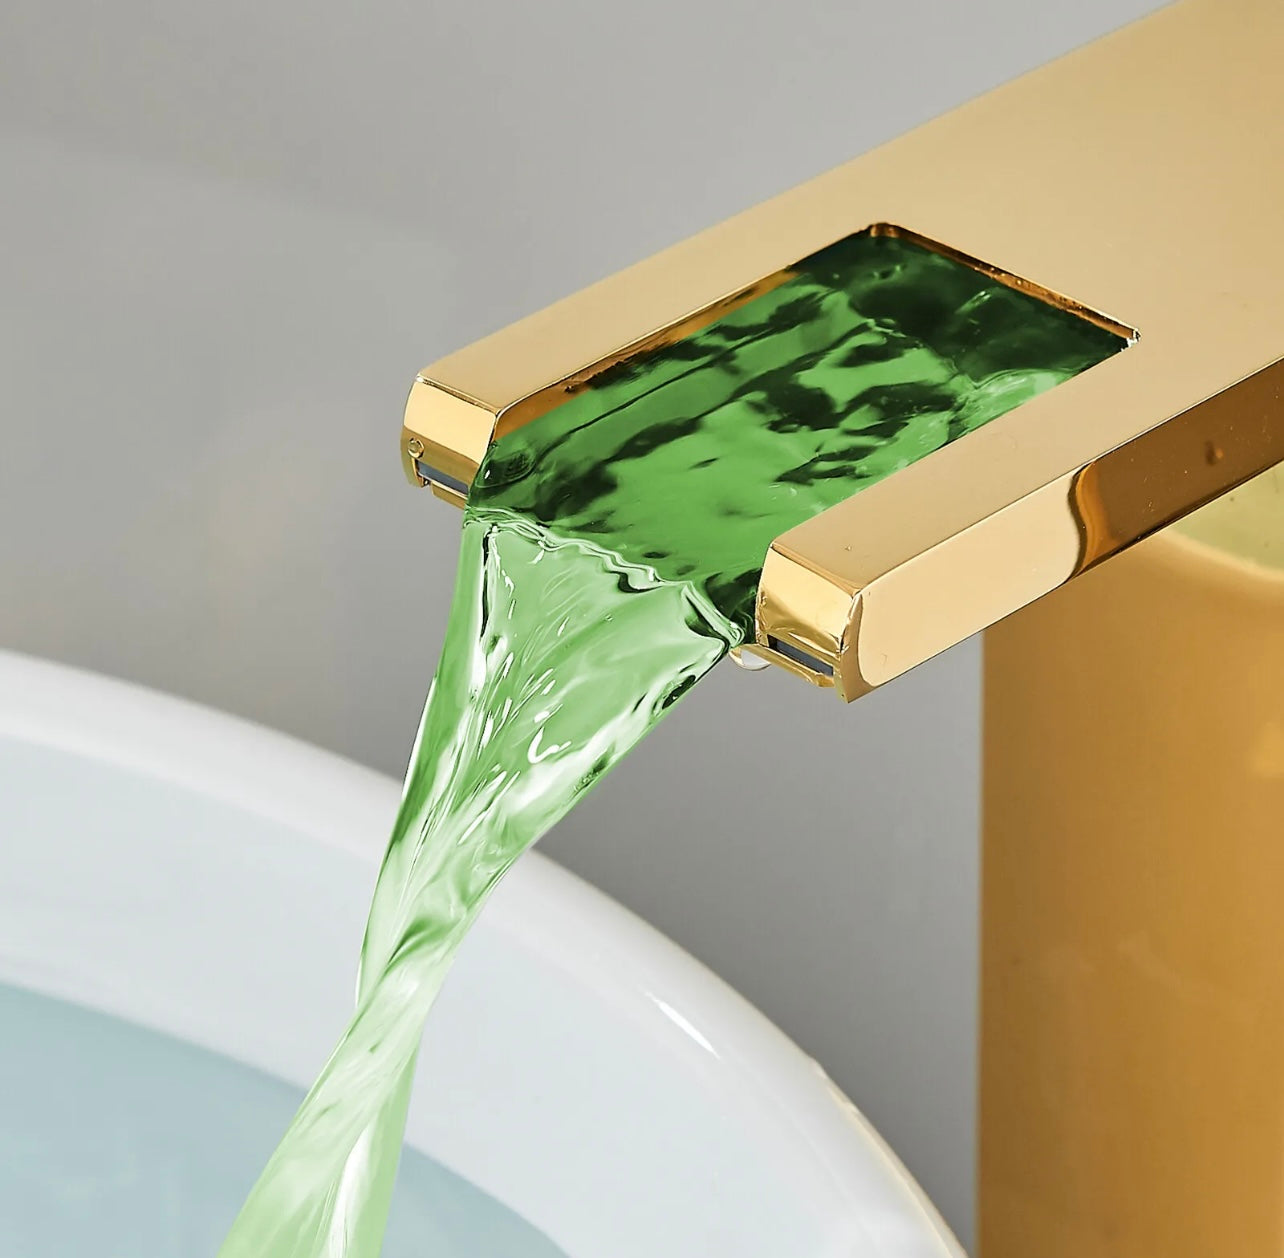 Gold led waterfall vessel faucet